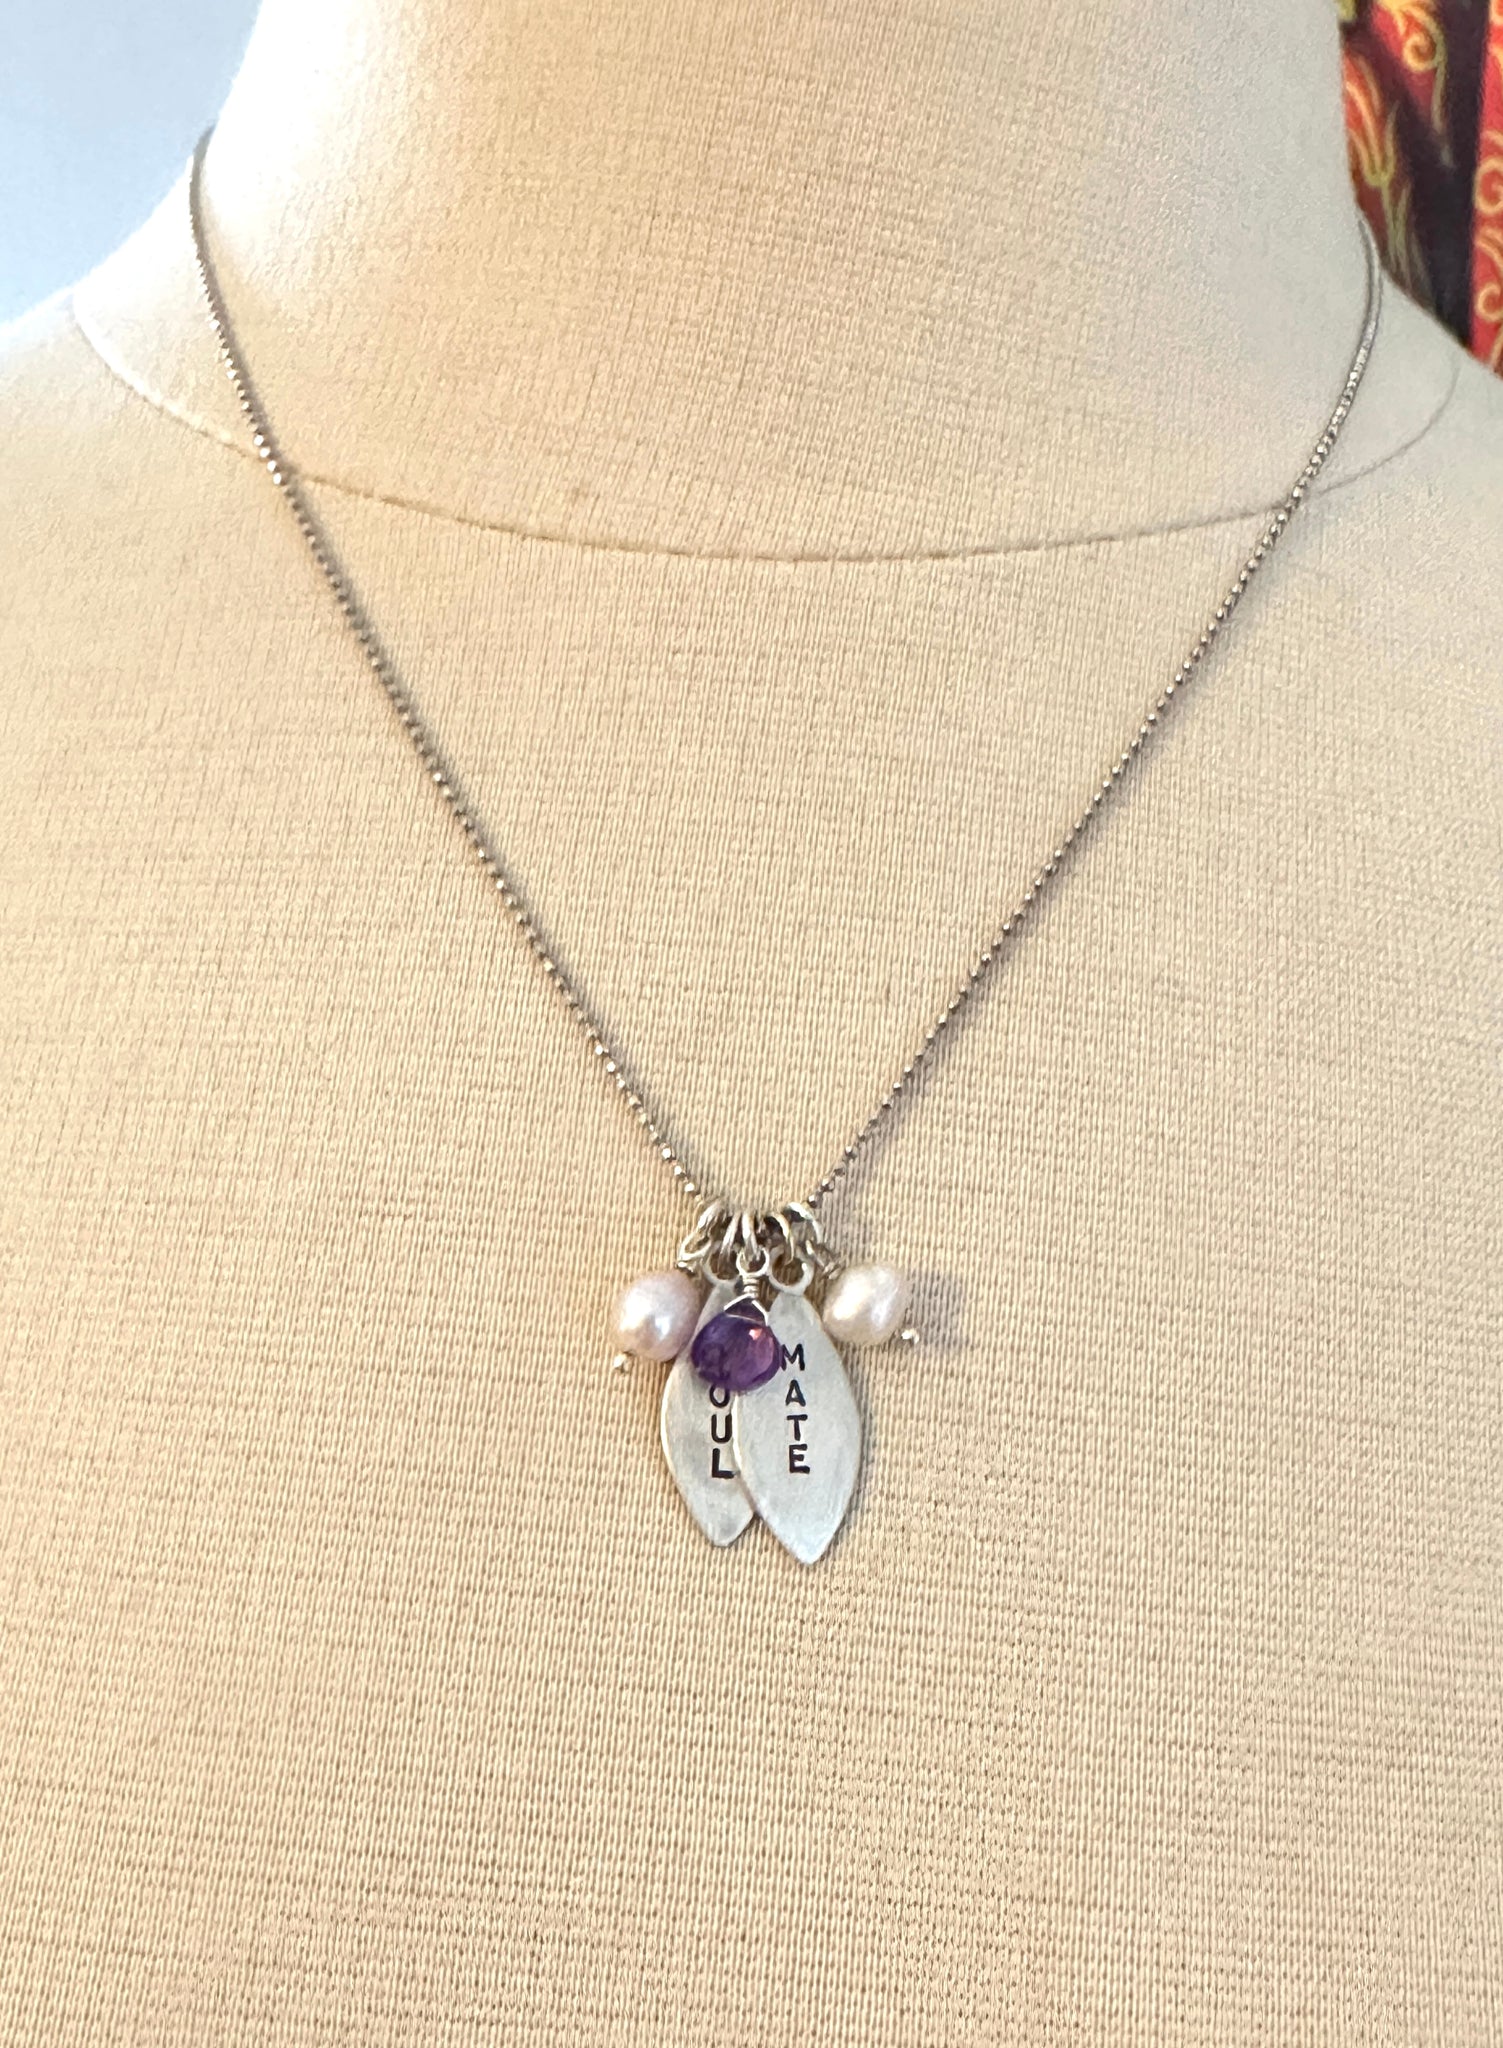 Soul Mate Amethyst & Pearl Charm Necklace